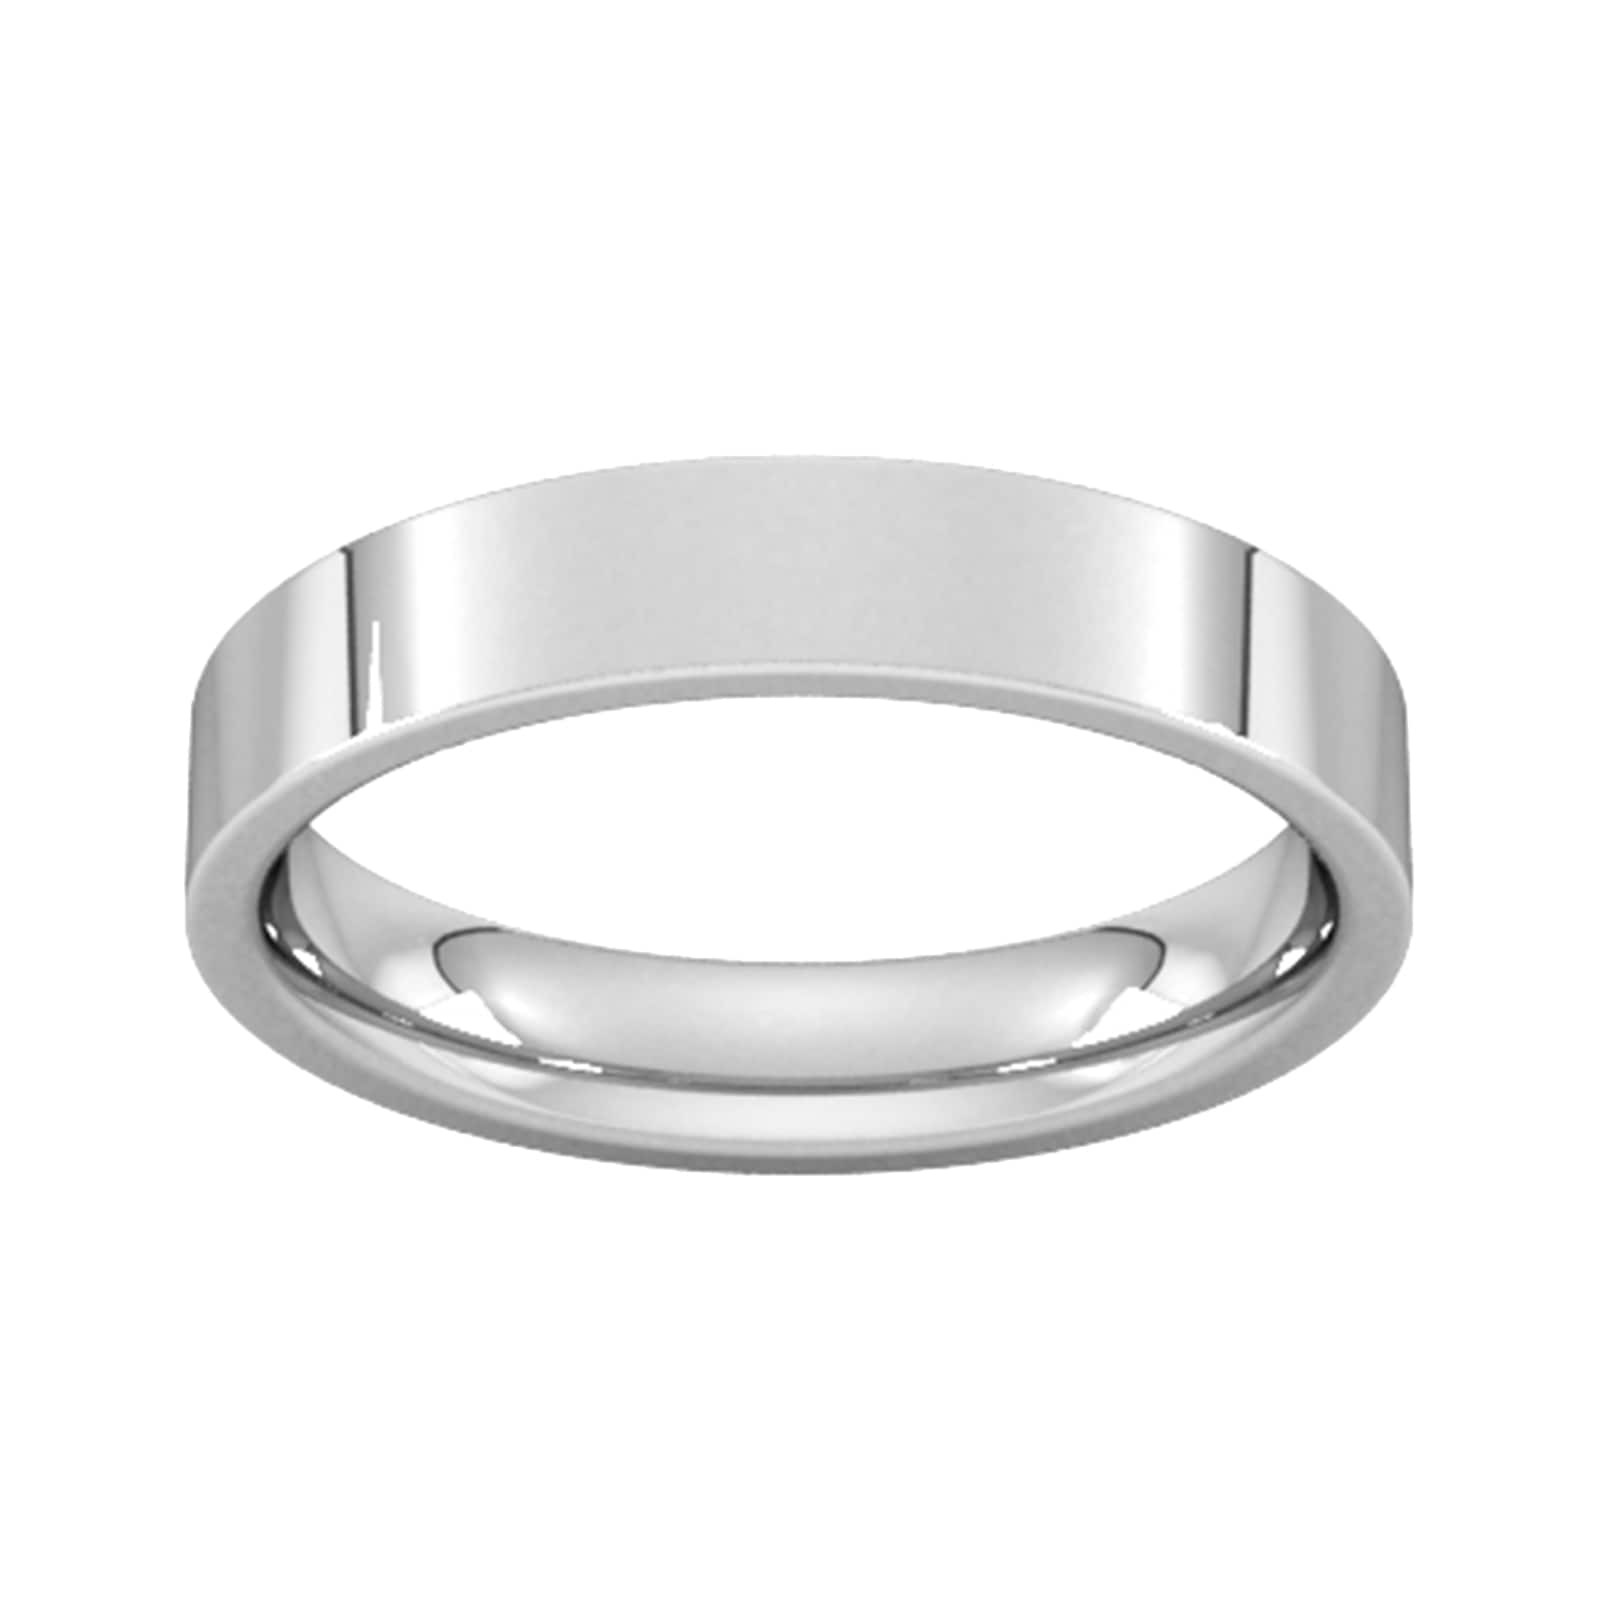 4mm Flat Court Heavy Wedding Ring In 18 Carat White Gold - Ring Size L